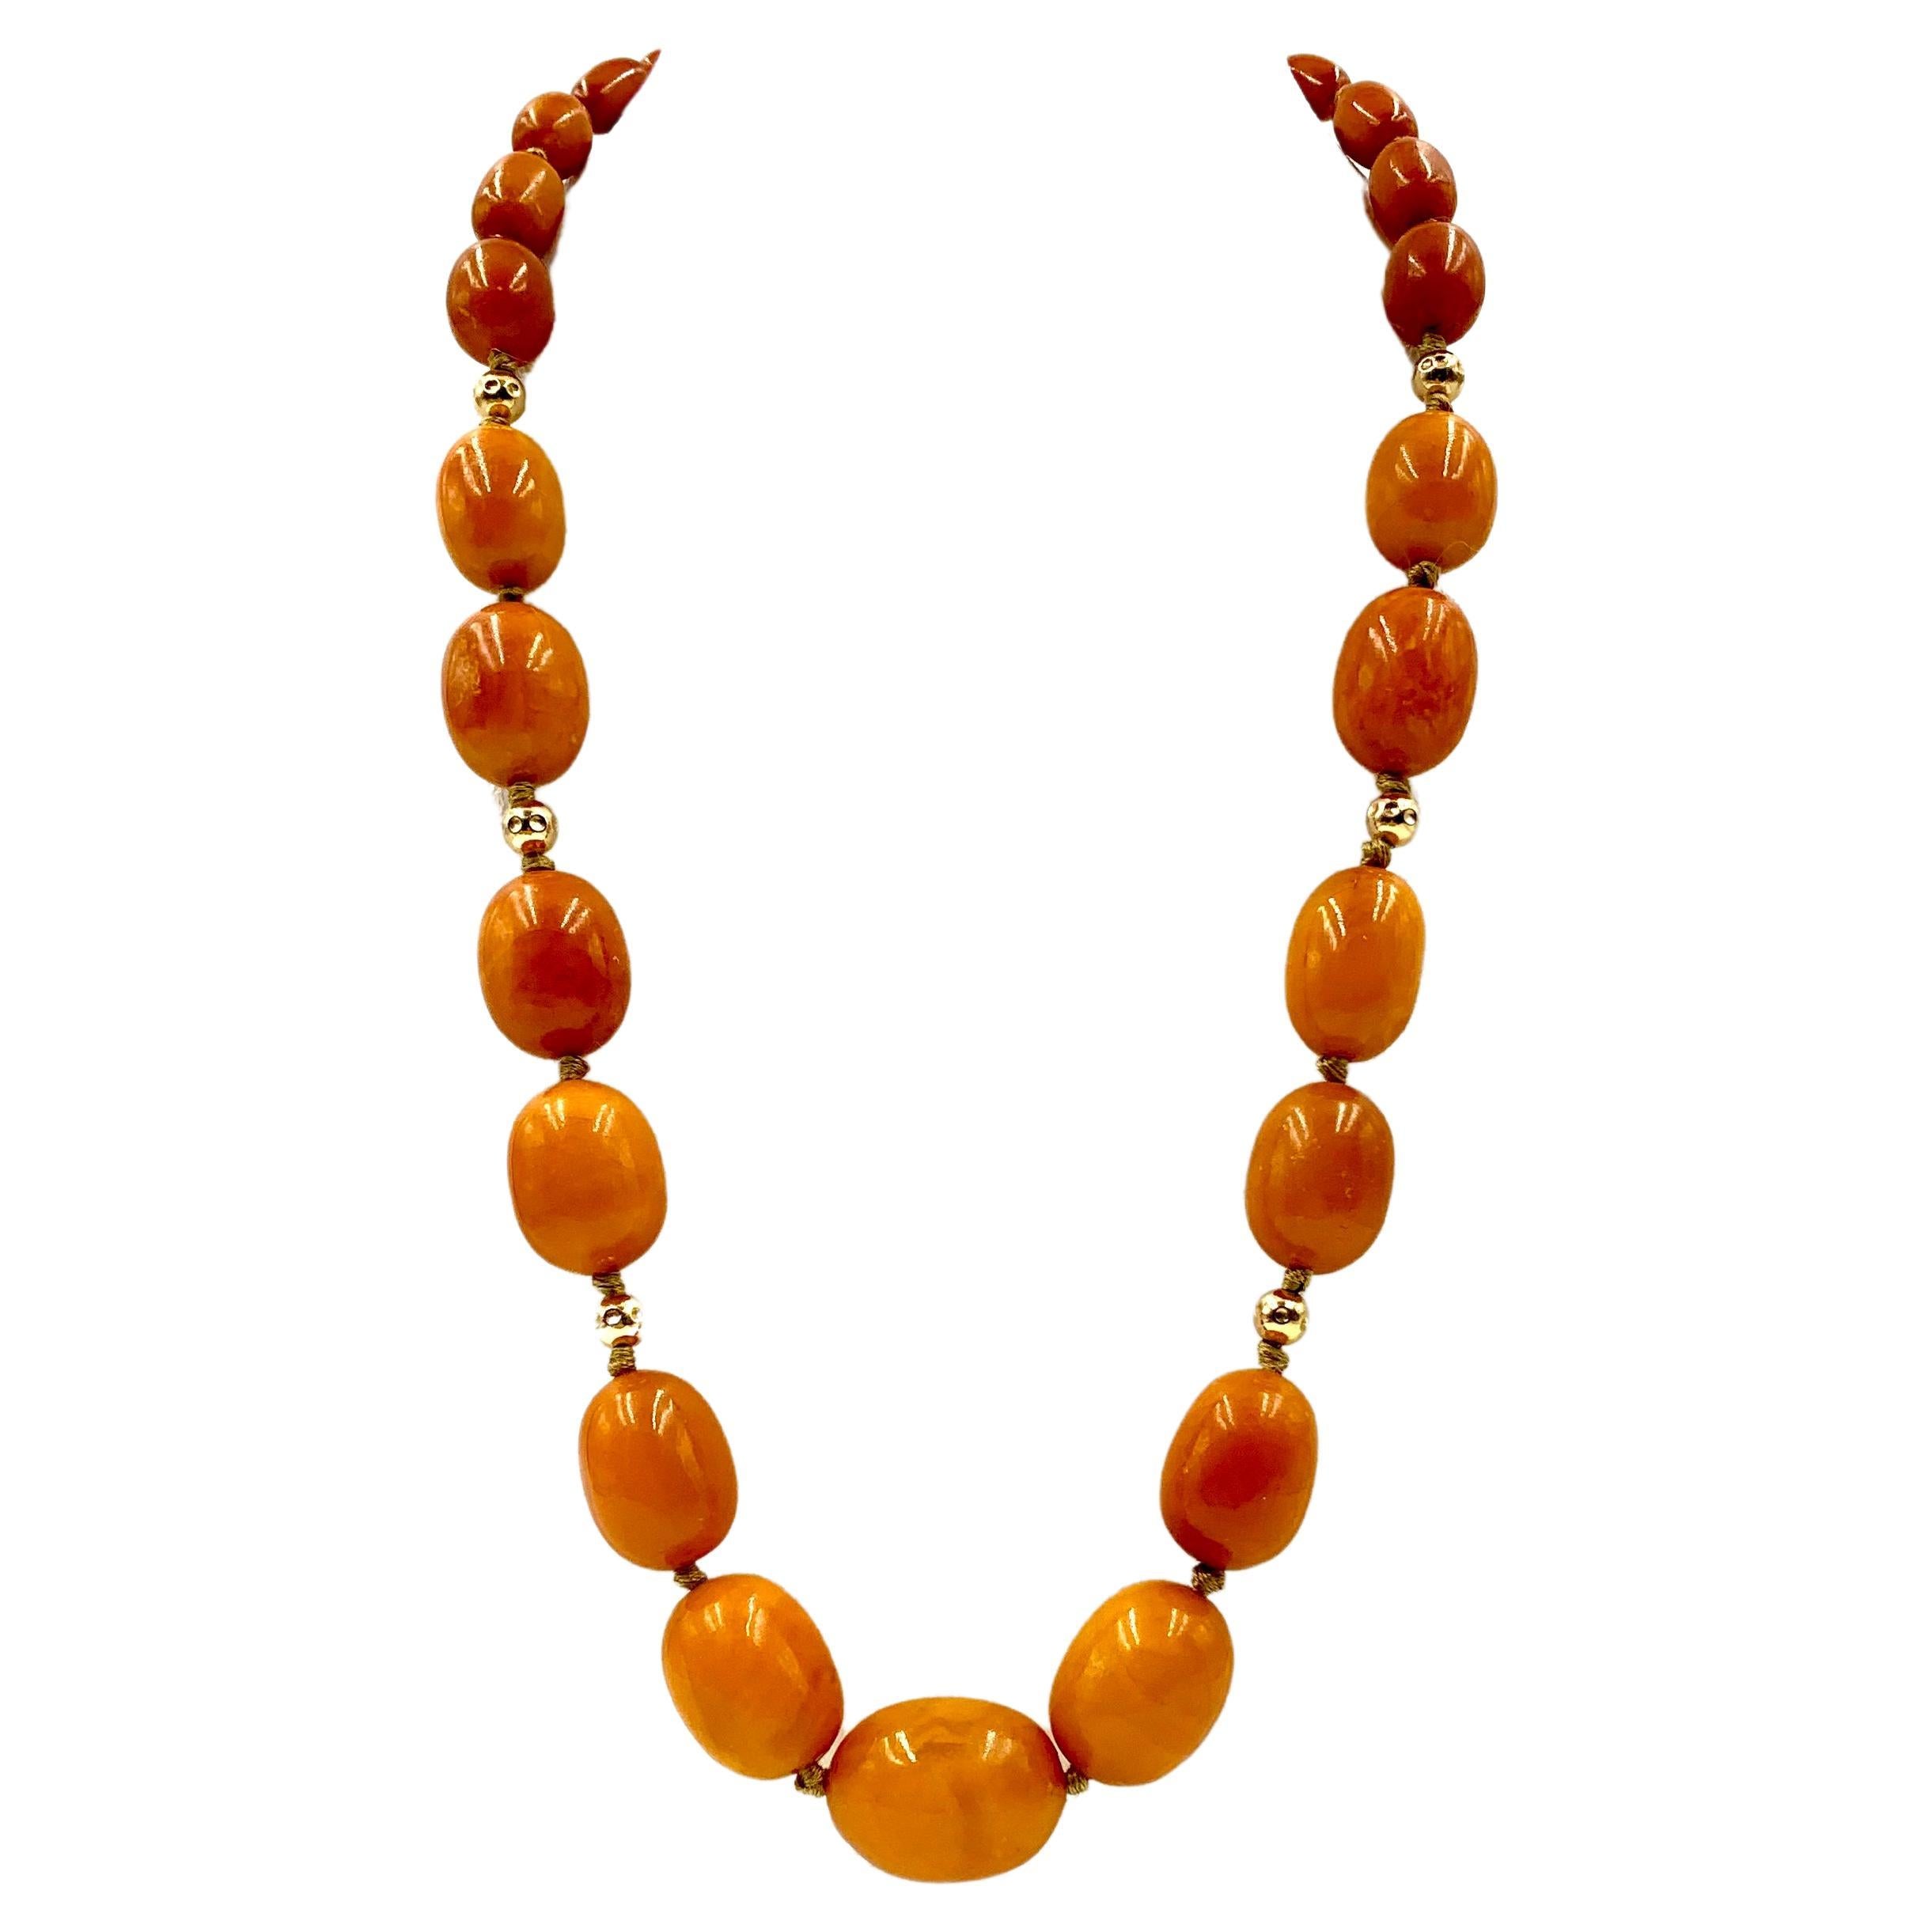 Large Classic Antique Butterscotch Baltic Amber and 14K Gold Bead Necklace